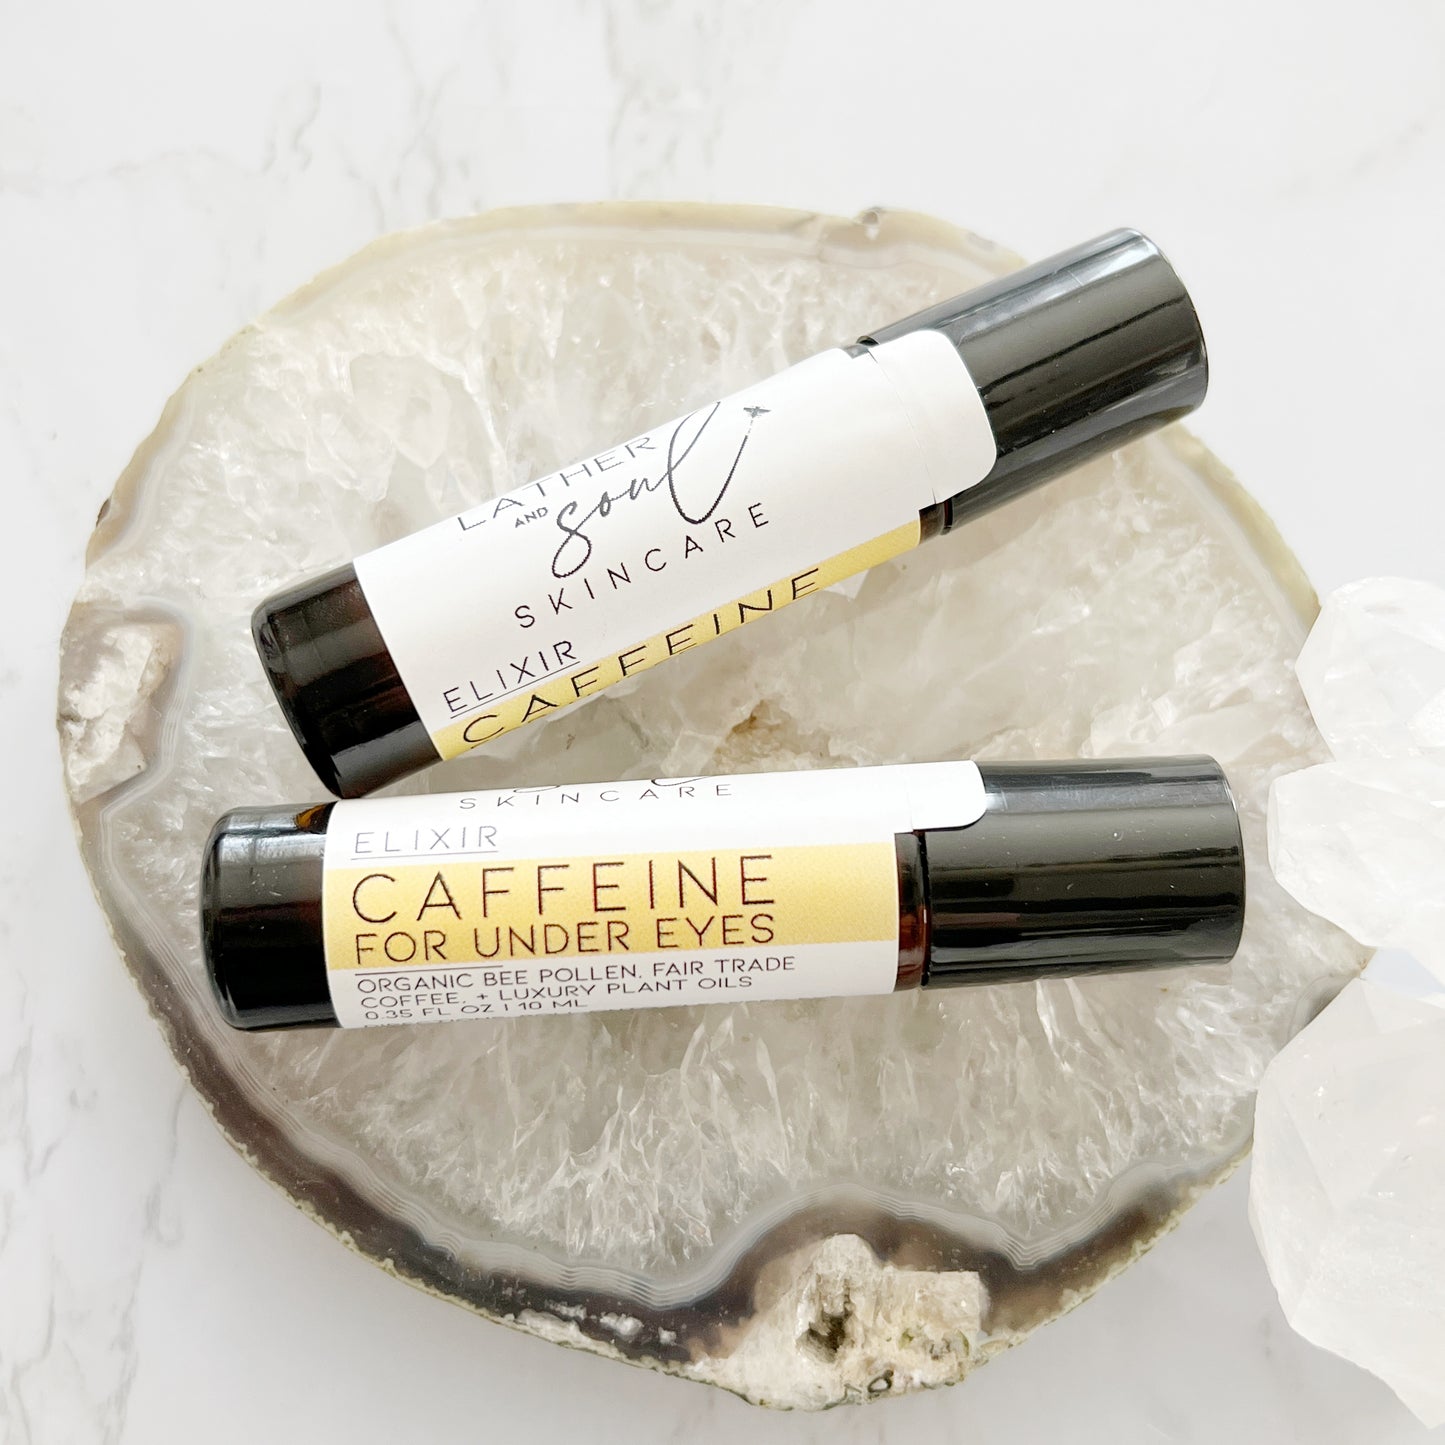 Caffeine under eye oil elixir by Lather and Soul Skincare